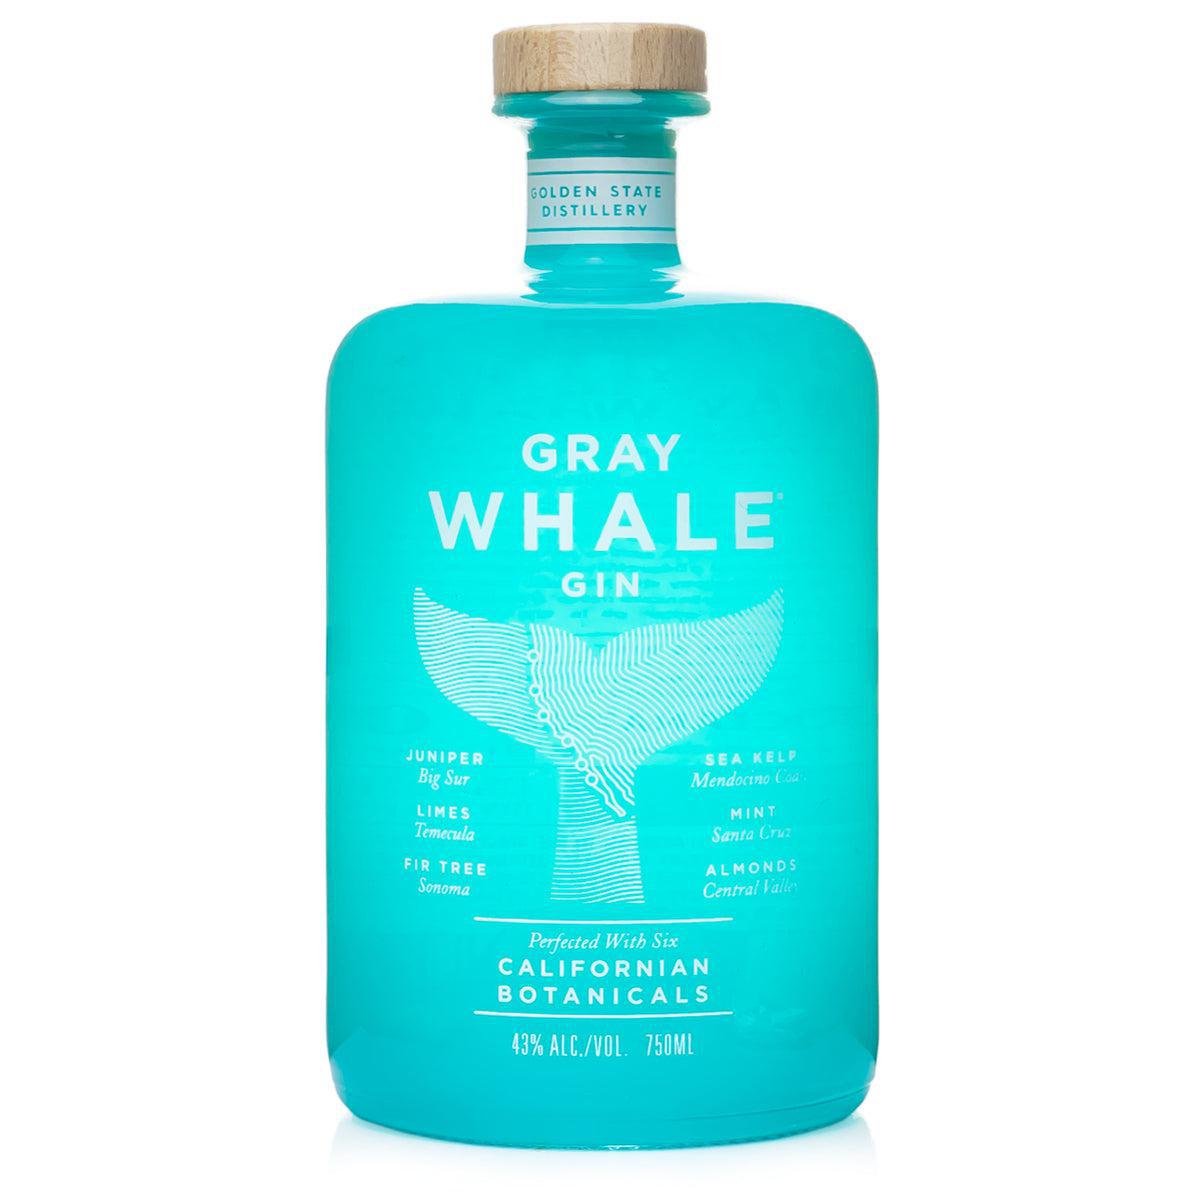 Golden State Distillery - 'Gray Whale' Californian Gin (750ML) - The Epicurean Trader